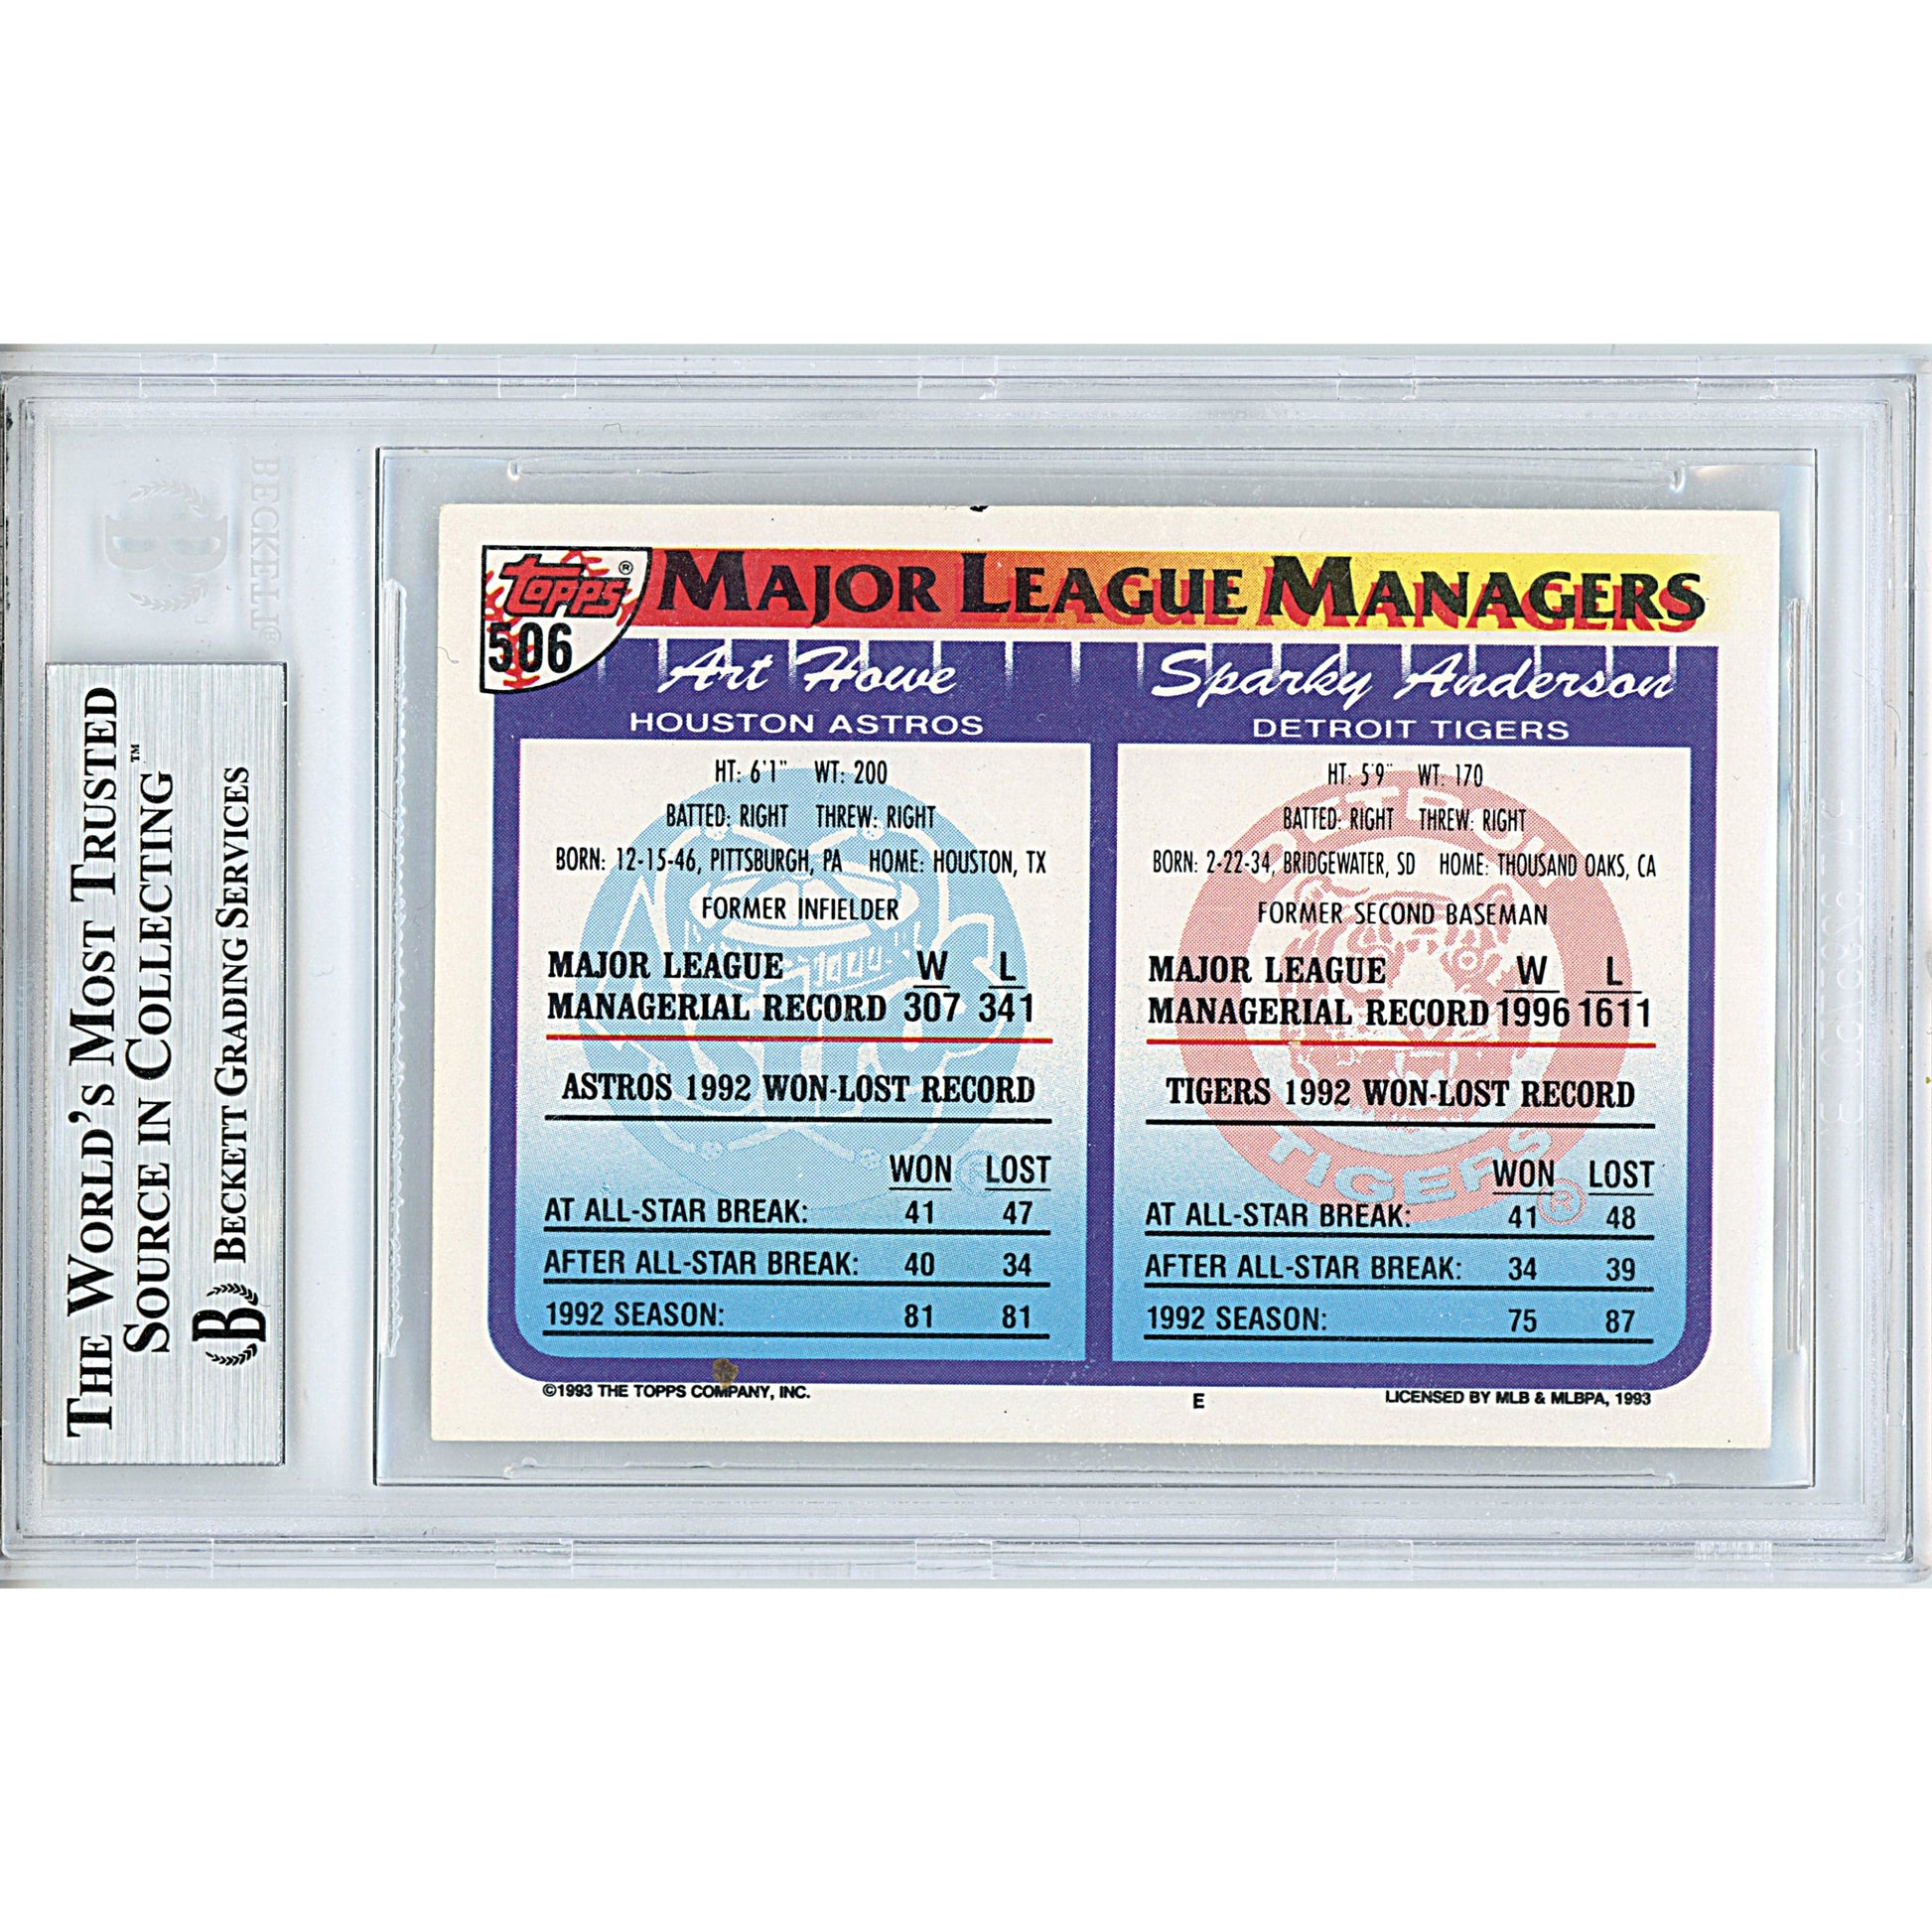 Baseballs- Autographed- Art Howe and Sparky Anderson Signed 1993 Topps Major League Managers Base Set Baseball Trading Card - Houston Astros - Detroit Tigers - Beckett BGS BAS Slabbed - Encapsulated 00011847709 - 103